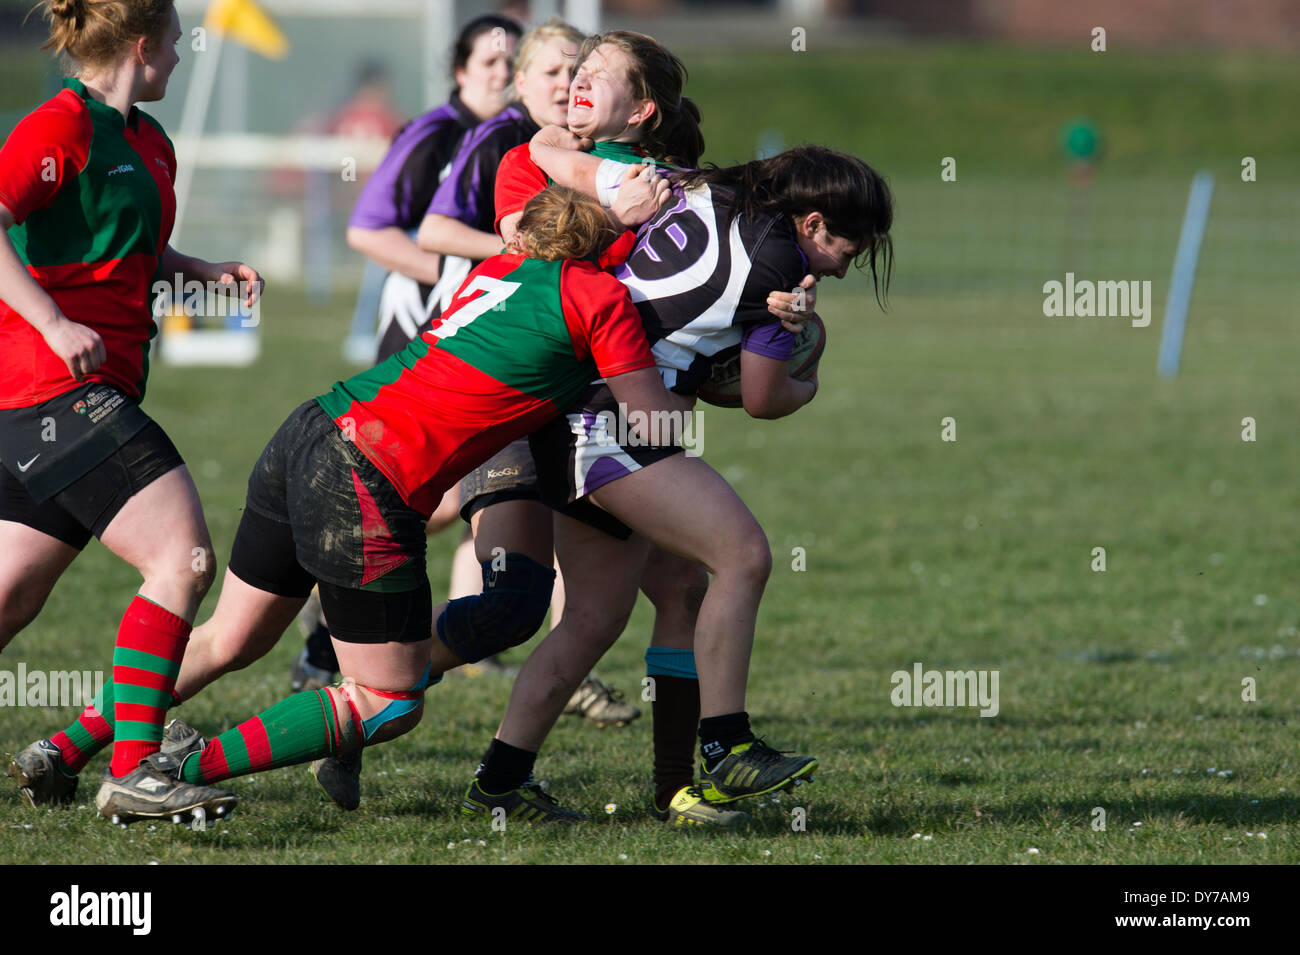 Aberystwyth university women (in red and green) playing rugby against Trinity St Davids university, Wales UK Stock Photo